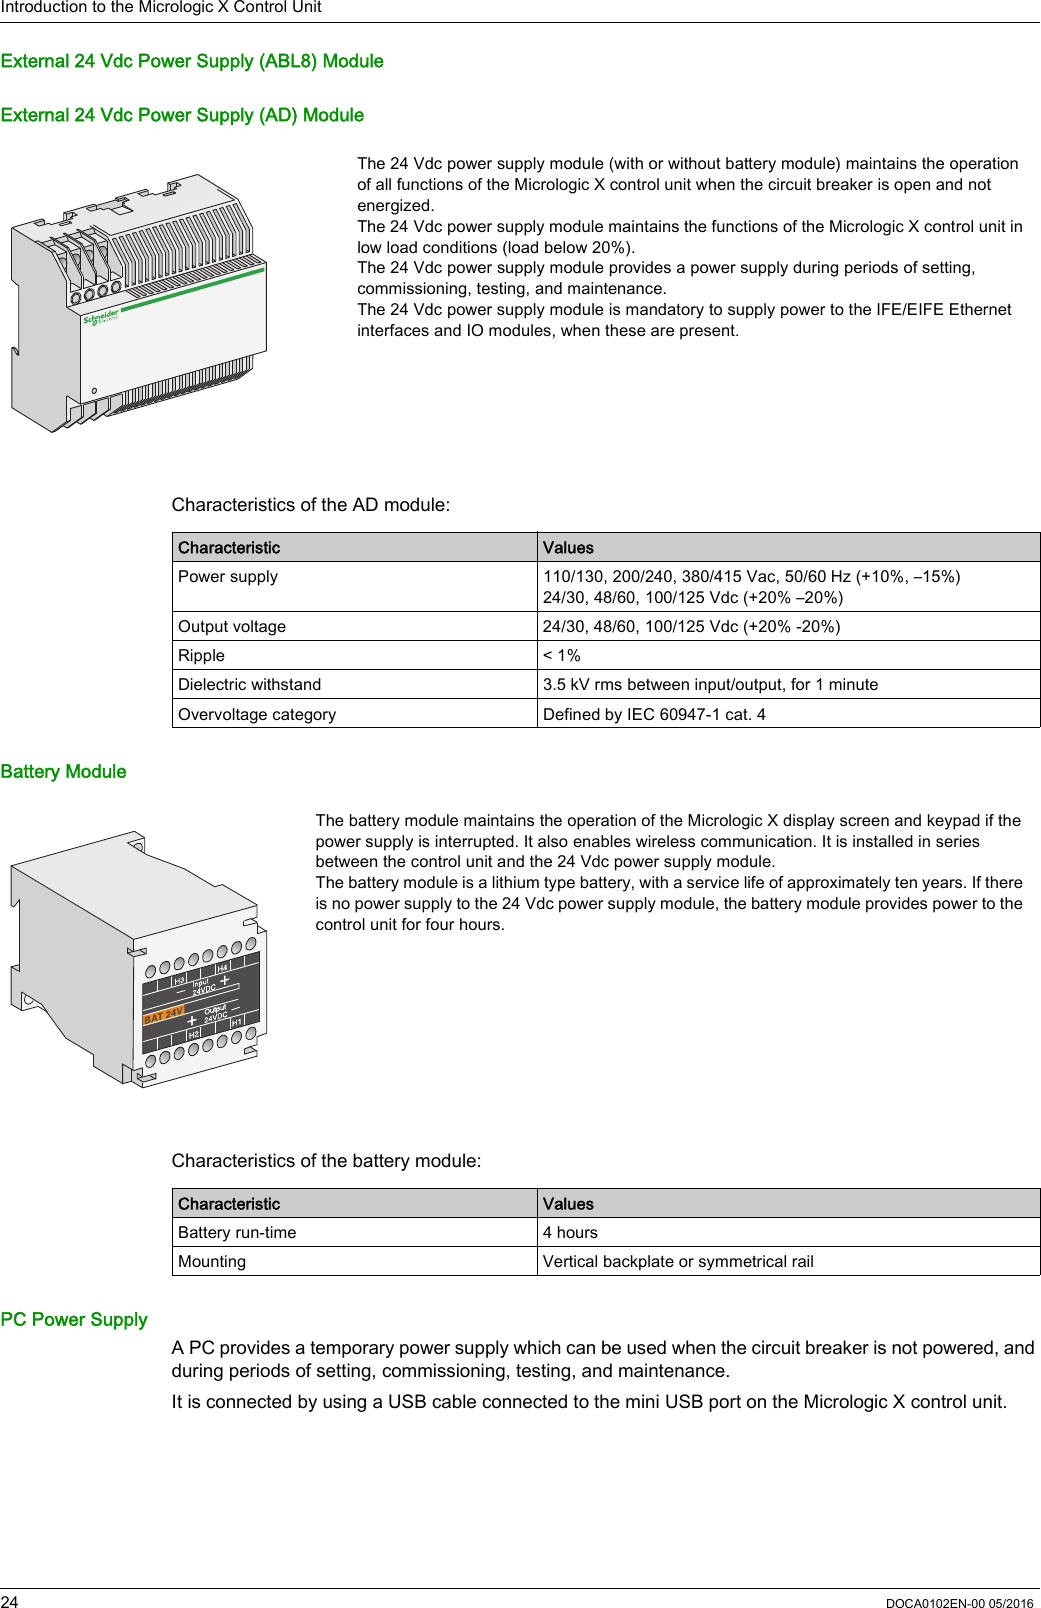 Introduction to the Micrologic X Control Unit24 DOCA0102EN-00 05/2016External 24 Vdc Power Supply (ABL8) ModuleExternal 24 Vdc Power Supply (AD) ModuleCharacteristics of the AD module:Battery ModuleCharacteristics of the battery module:PC Power SupplyA PC provides a temporary power supply which can be used when the circuit breaker is not powered, and during periods of setting, commissioning, testing, and maintenance. It is connected by using a USB cable connected to the mini USB port on the Micrologic X control unit.The 24 Vdc power supply module (with or without battery module) maintains the operation of all functions of the Micrologic X control unit when the circuit breaker is open and not energized. The 24 Vdc power supply module maintains the functions of the Micrologic X control unit in low load conditions (load below 20%).The 24 Vdc power supply module provides a power supply during periods of setting, commissioning, testing, and maintenance.The 24 Vdc power supply module is mandatory to supply power to the IFE/EIFE Ethernet interfaces and IO modules, when these are present.Characteristic ValuesPower supply 110/130, 200/240, 380/415 Vac, 50/60 Hz (+10%, –15%)24/30, 48/60, 100/125 Vdc (+20% –20%)Output voltage 24/30, 48/60, 100/125 Vdc (+20% -20%)Ripple &lt; 1%Dielectric withstand 3.5 kV rms between input/output, for 1 minuteOvervoltage category Defined by IEC 60947-1 cat. 4The battery module maintains the operation of the Micrologic X display screen and keypad if the power supply is interrupted. It also enables wireless communication. It is installed in series between the control unit and the 24 Vdc power supply module.The battery module is a lithium type battery, with a service life of approximately ten years. If there is no power supply to the 24 Vdc power supply module, the battery module provides power to the control unit for four hours.Characteristic ValuesBattery run-time 4 hoursMounting Vertical backplate or symmetrical rail